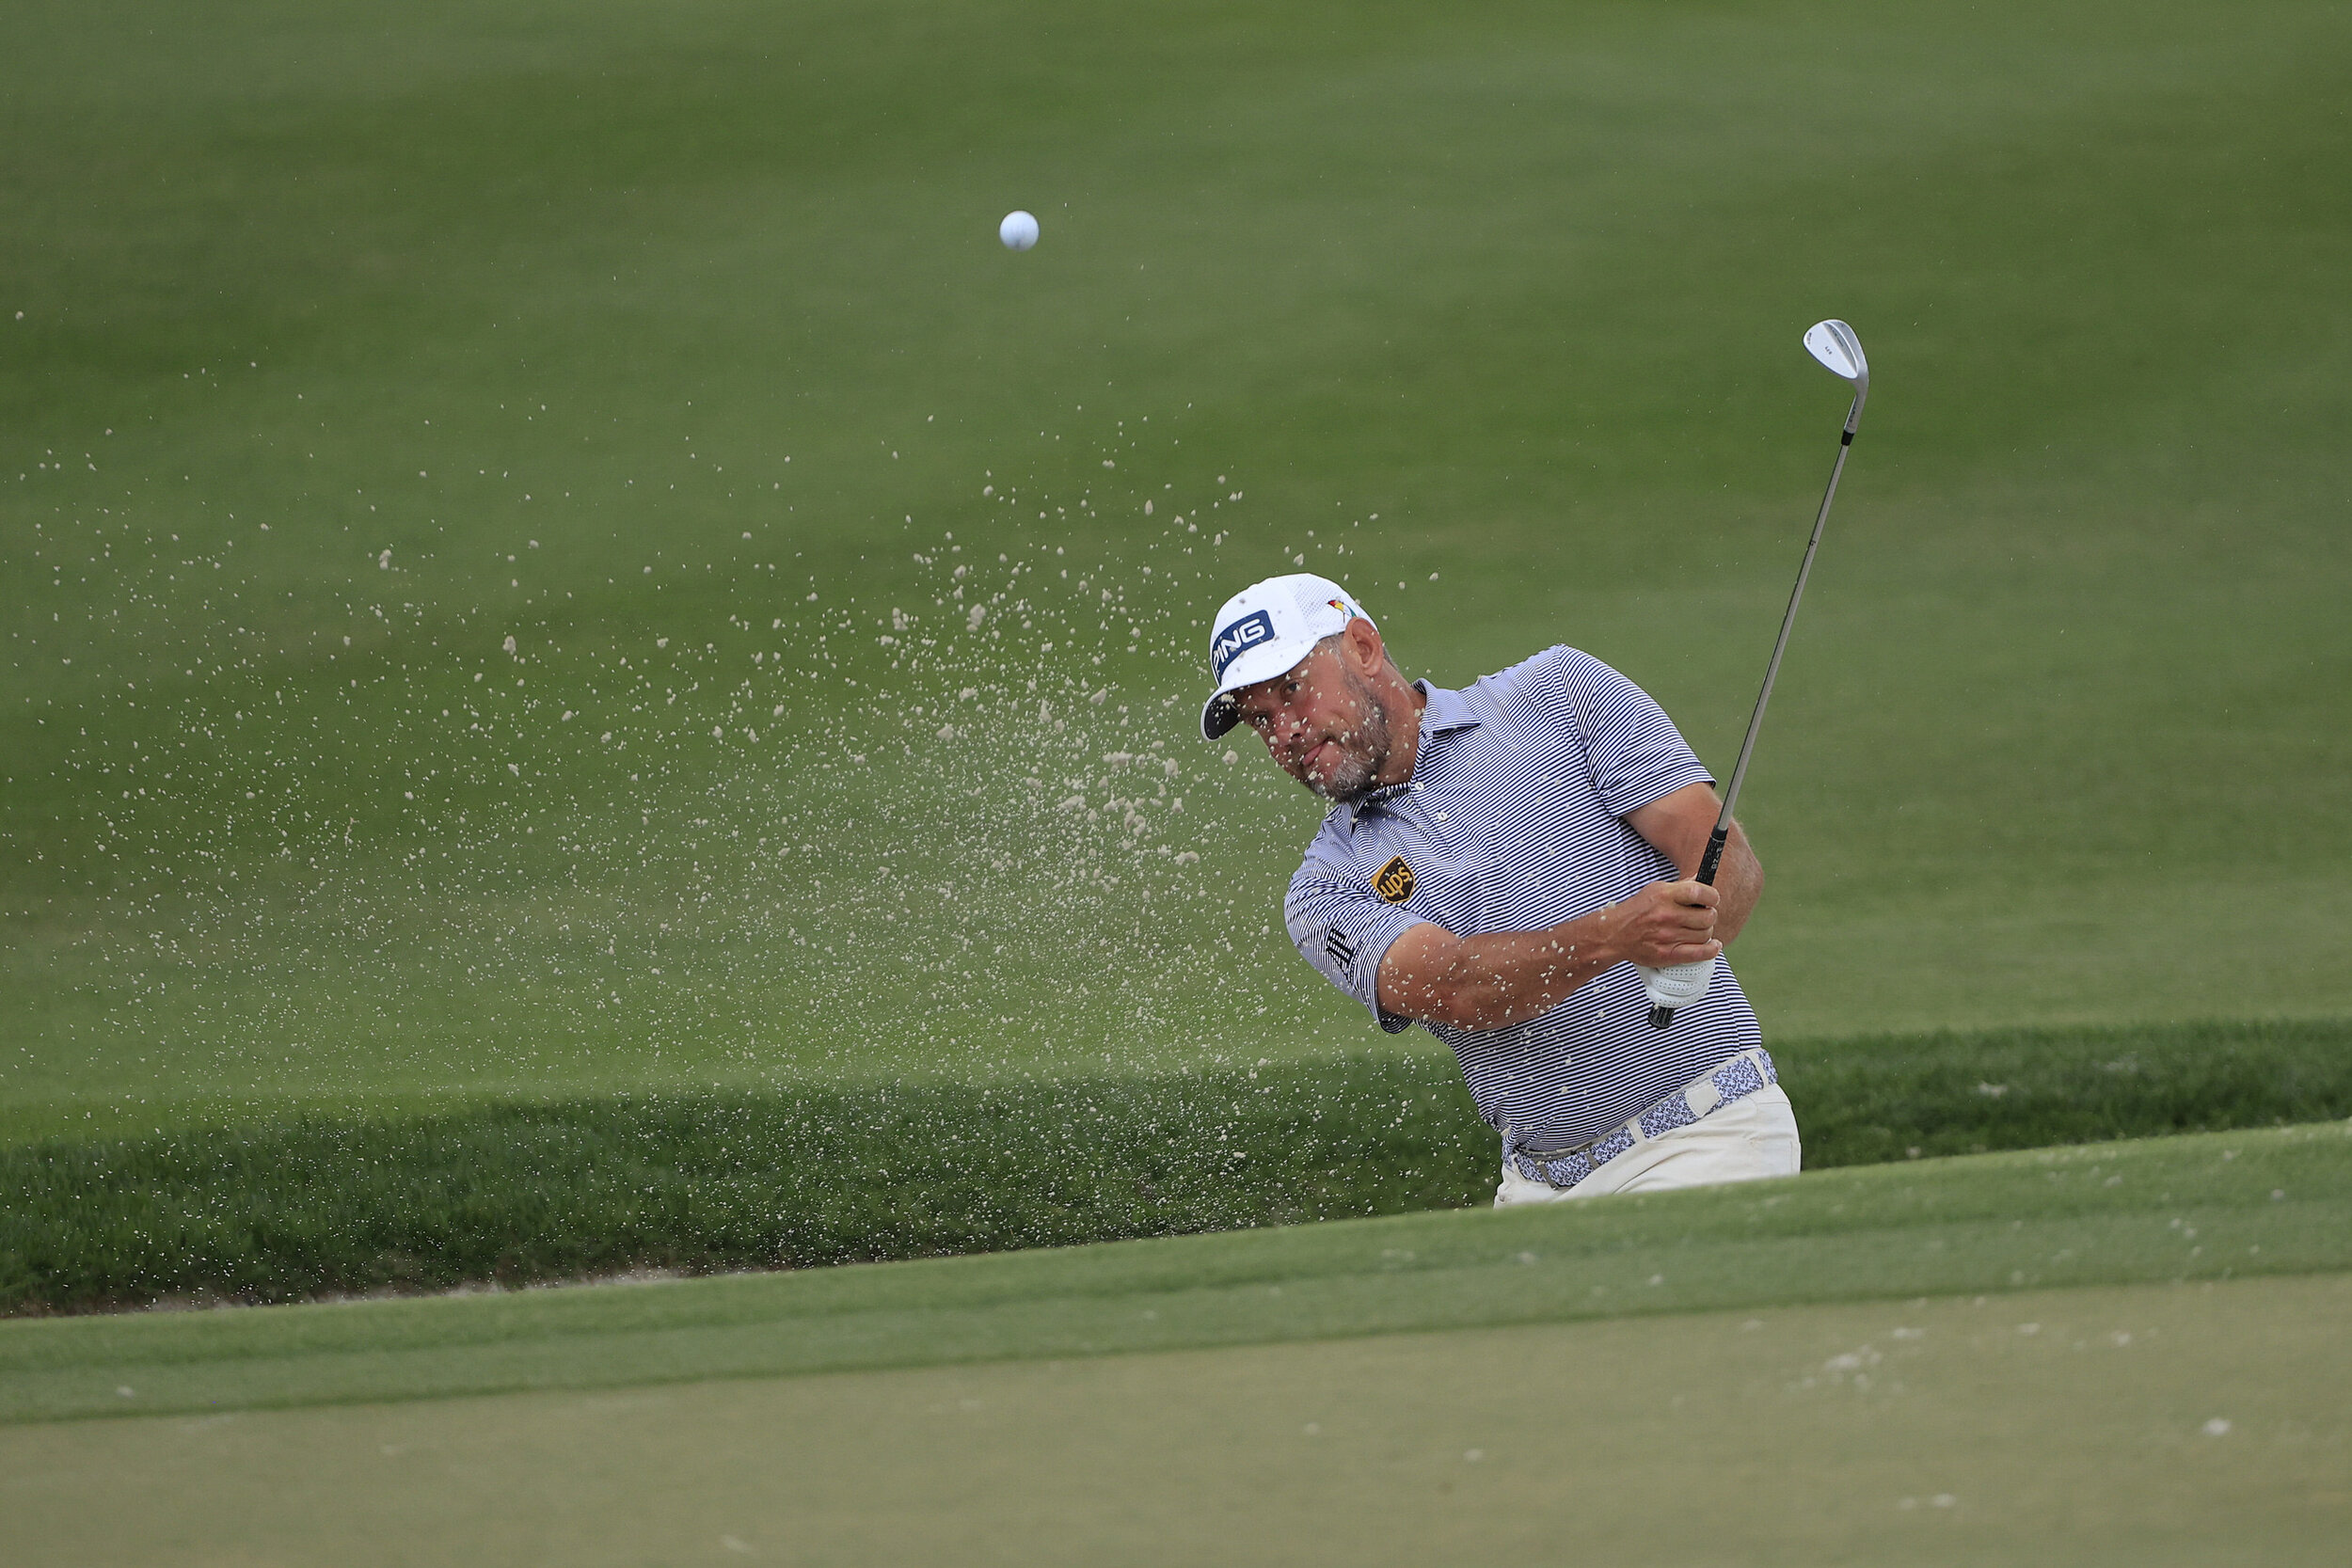  ORLANDO, FLORIDA - MARCH 06: Lee Westwood of England plays a second shot on the second hole during the third round of the Arnold Palmer Invitational Presented by MasterCard at the Bay Hill Club and Lodge on March 06, 2021 in Orlando, Florida. (Photo